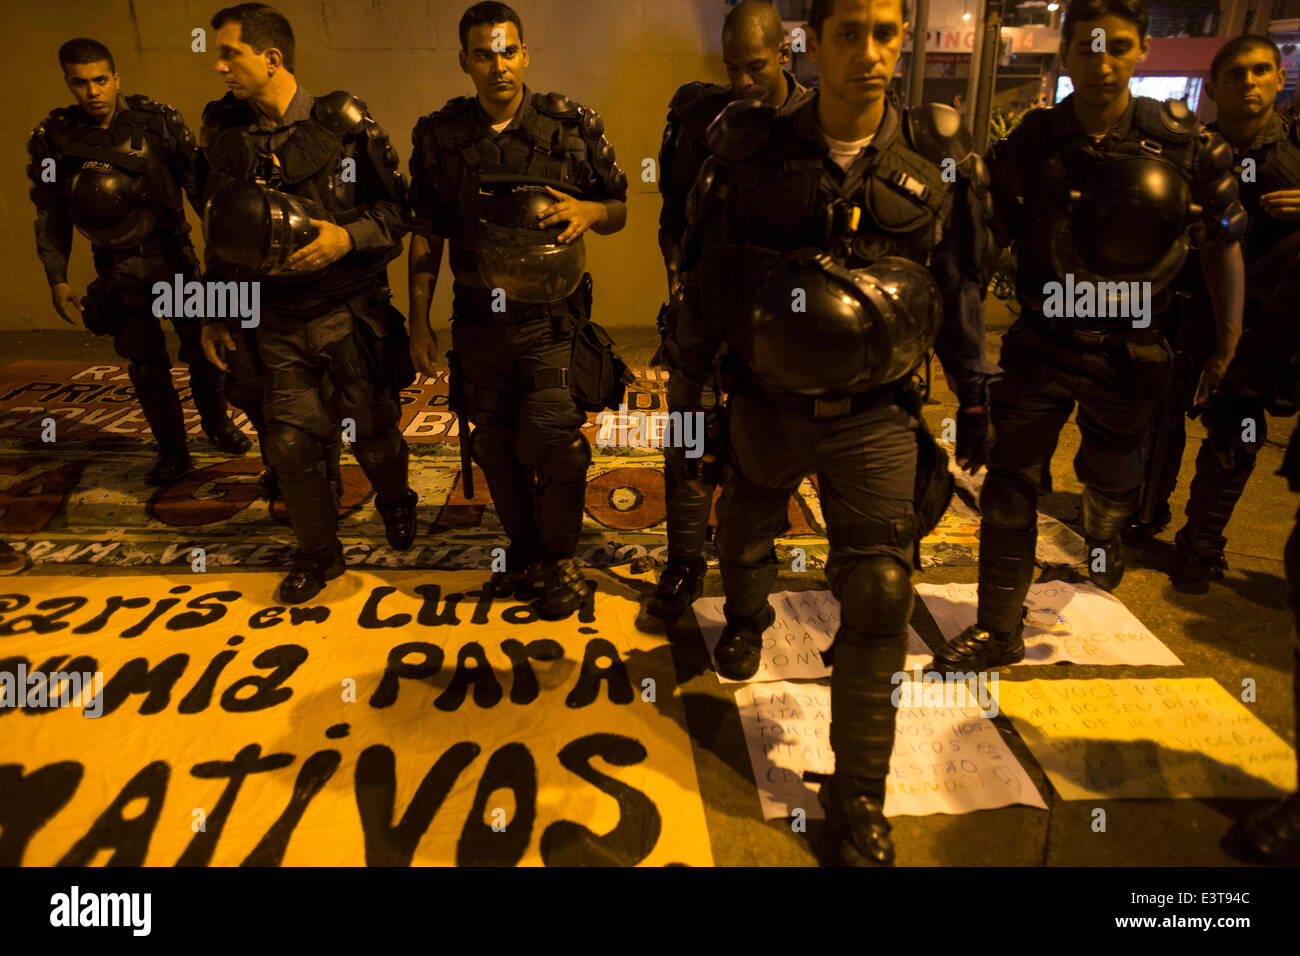 Rio De Janeiro, Brazil. 28th June, 2014. Police officers step on cardboards of demonstrators during a protest against FIFA World Cup outside the Estadio Maracana Stadium during a Round of 16 match between Colombia and Uruguay of 2014 FIFA World Cup, in Rio de Janeiro, Brazil, on June 28, 2014. Credit:  Guillermo Arias/Xinhua/Alamy Live News Stock Photo